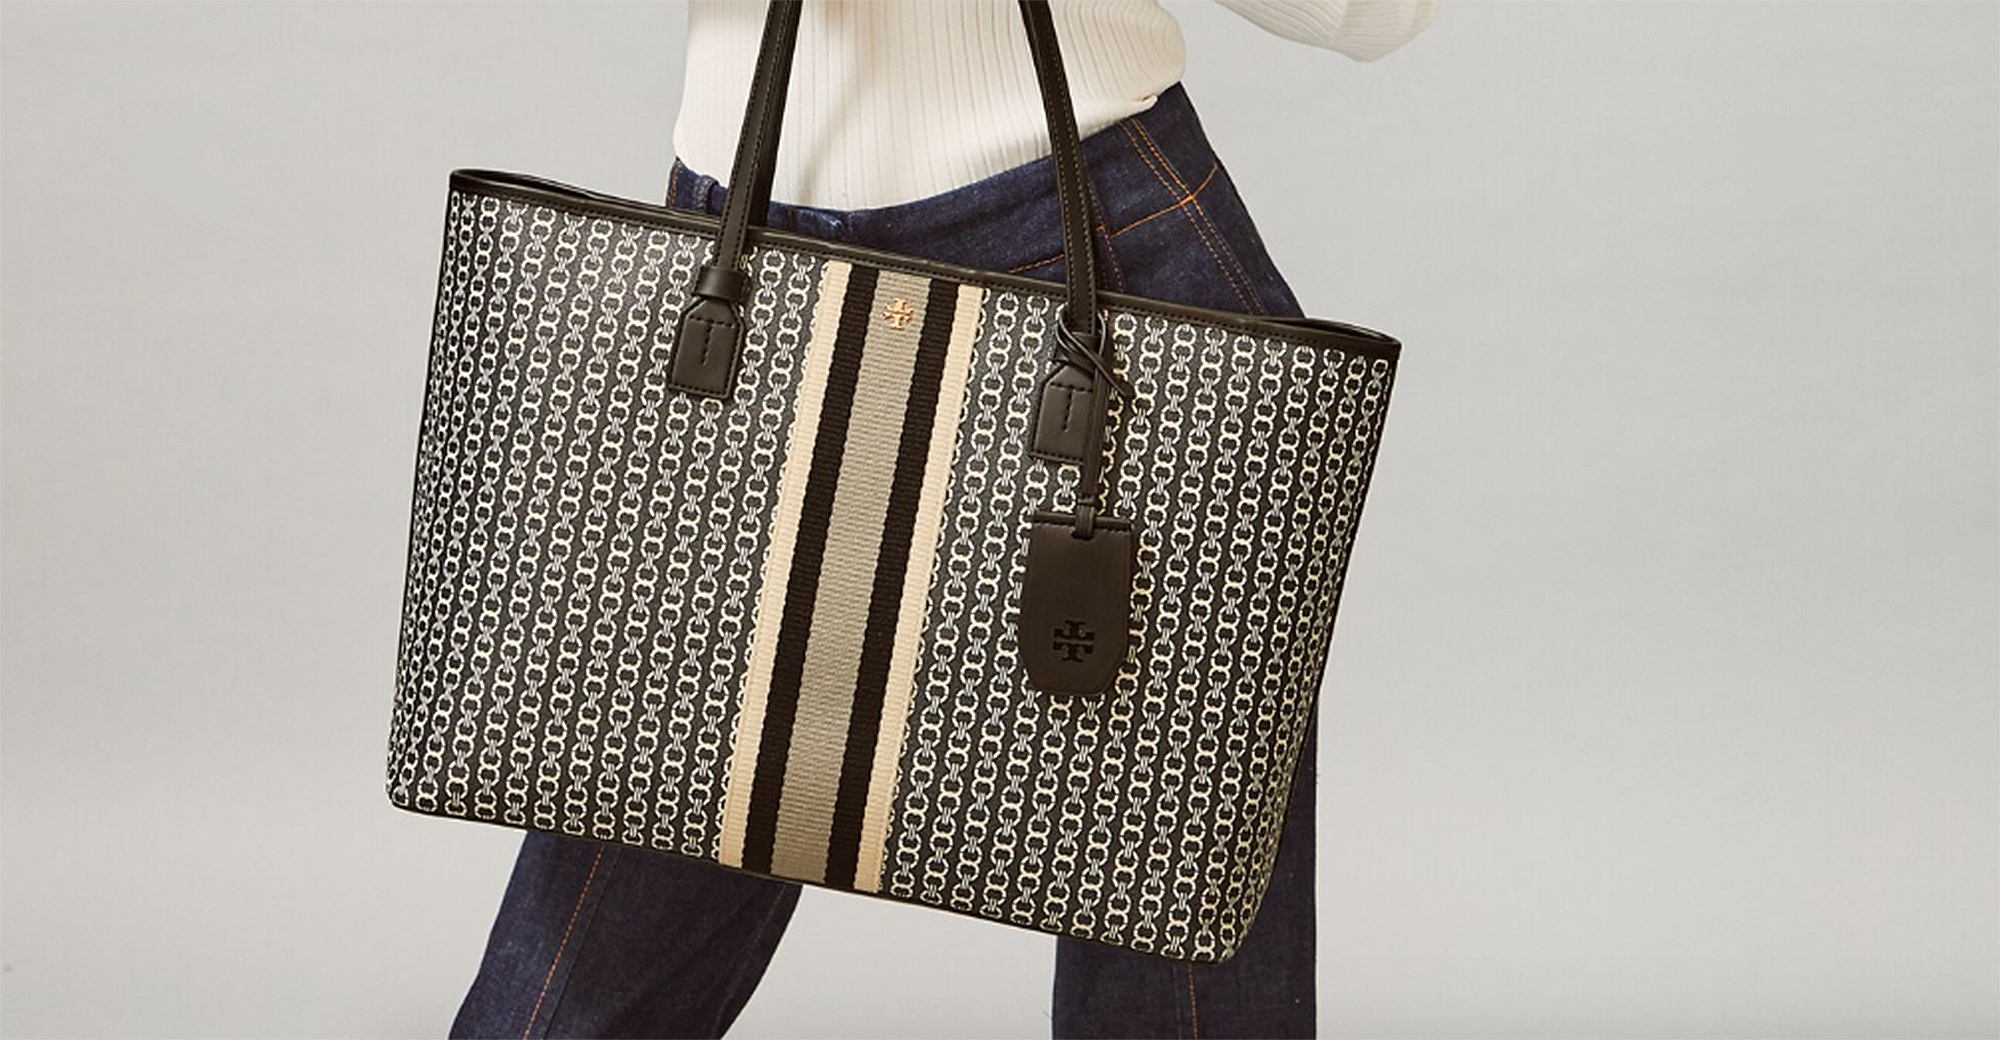 Tory Burch Kira Quilted Tote Bag - Black | Editorialist